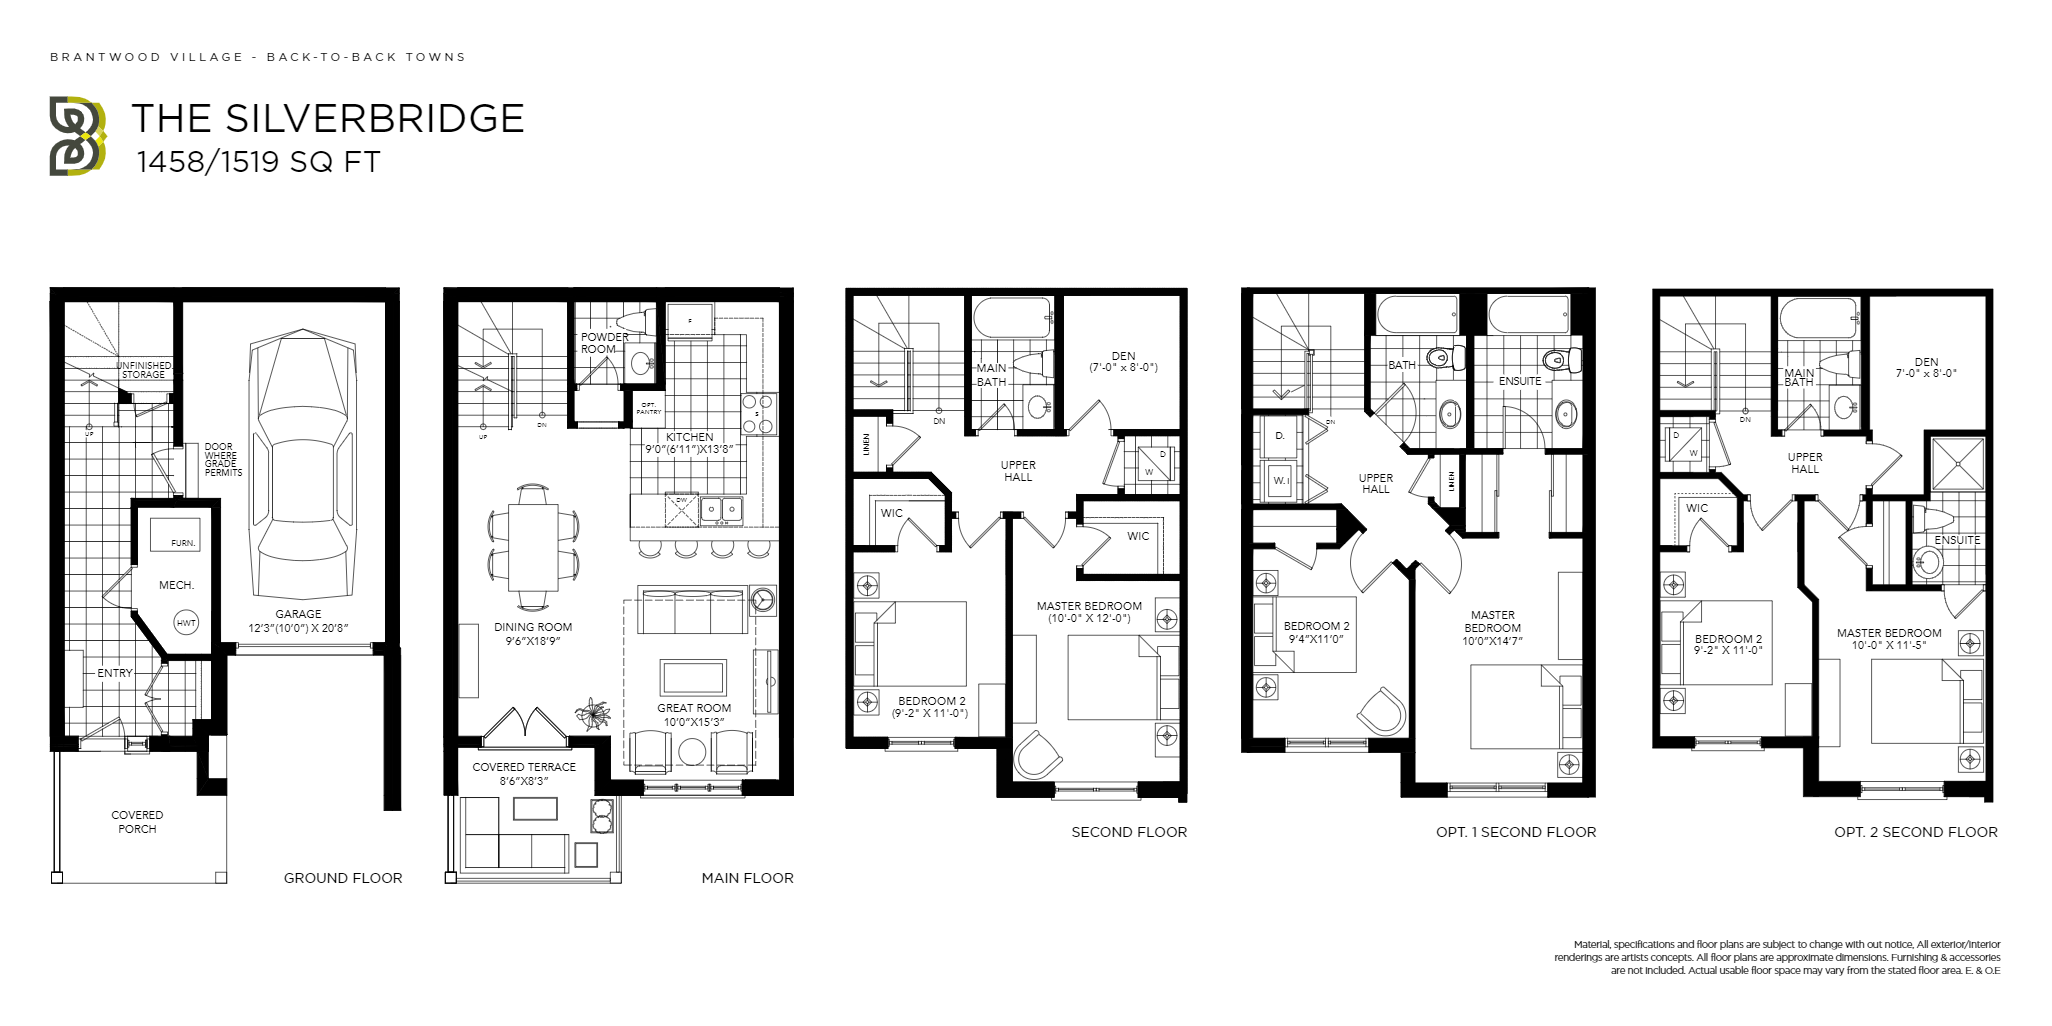 Silverbridge Floor Plan of Brantwood Village Towns with undefined beds